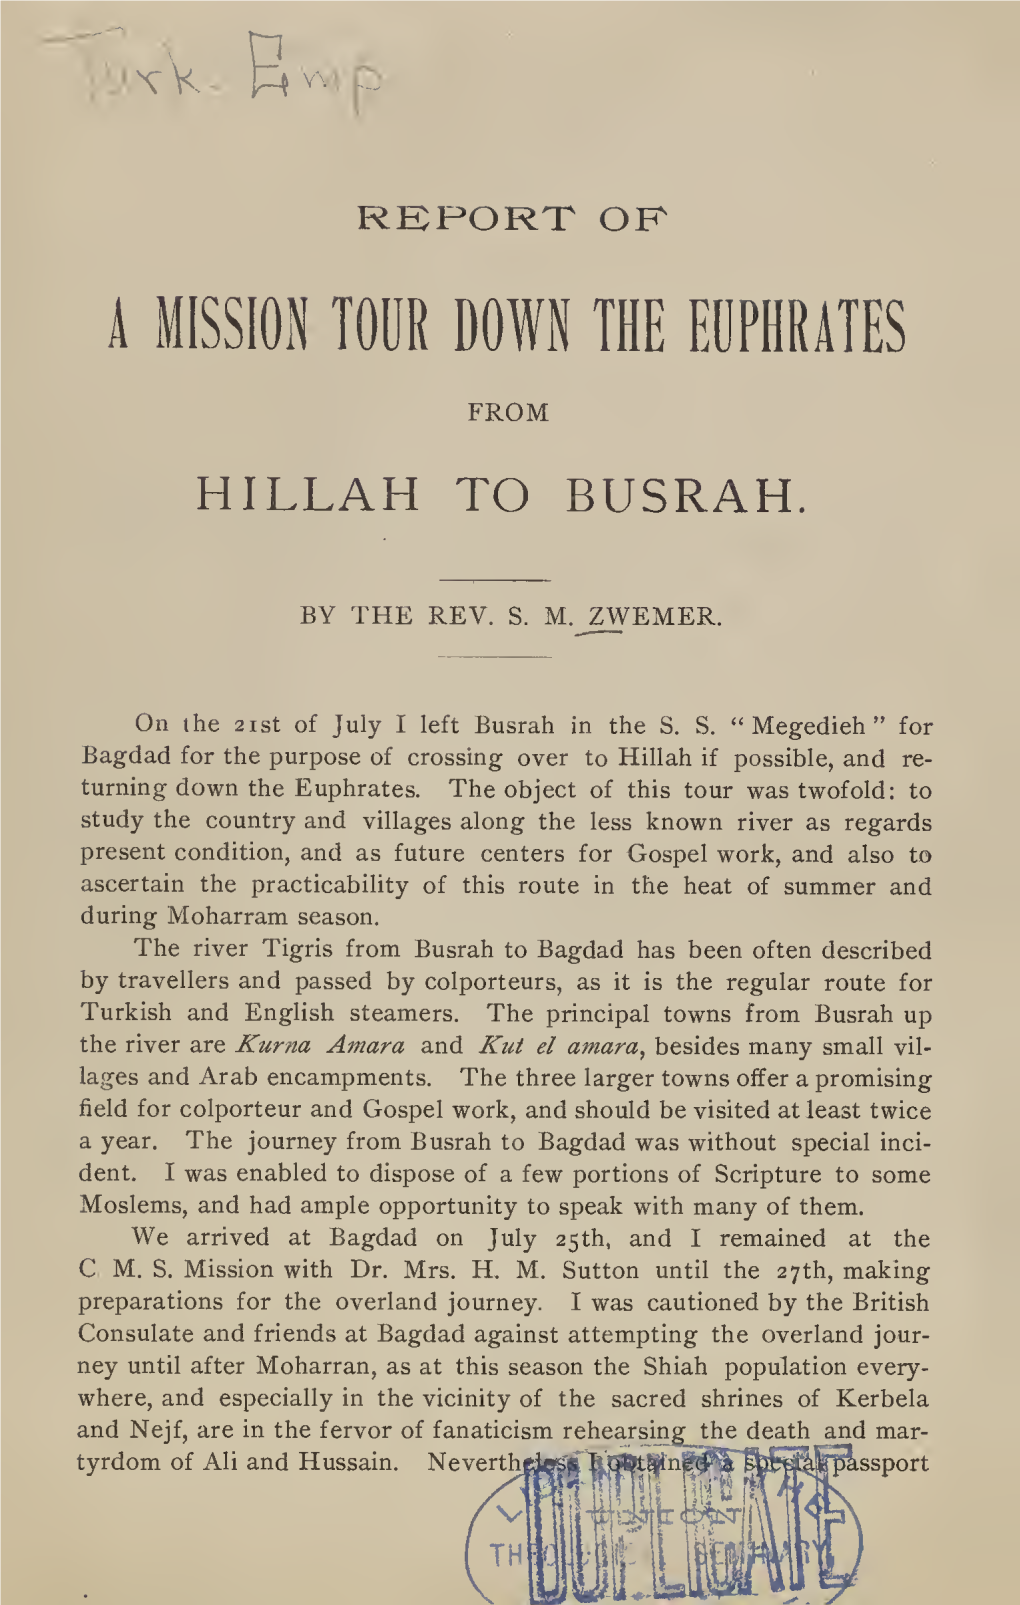 From Hillah to Busrah